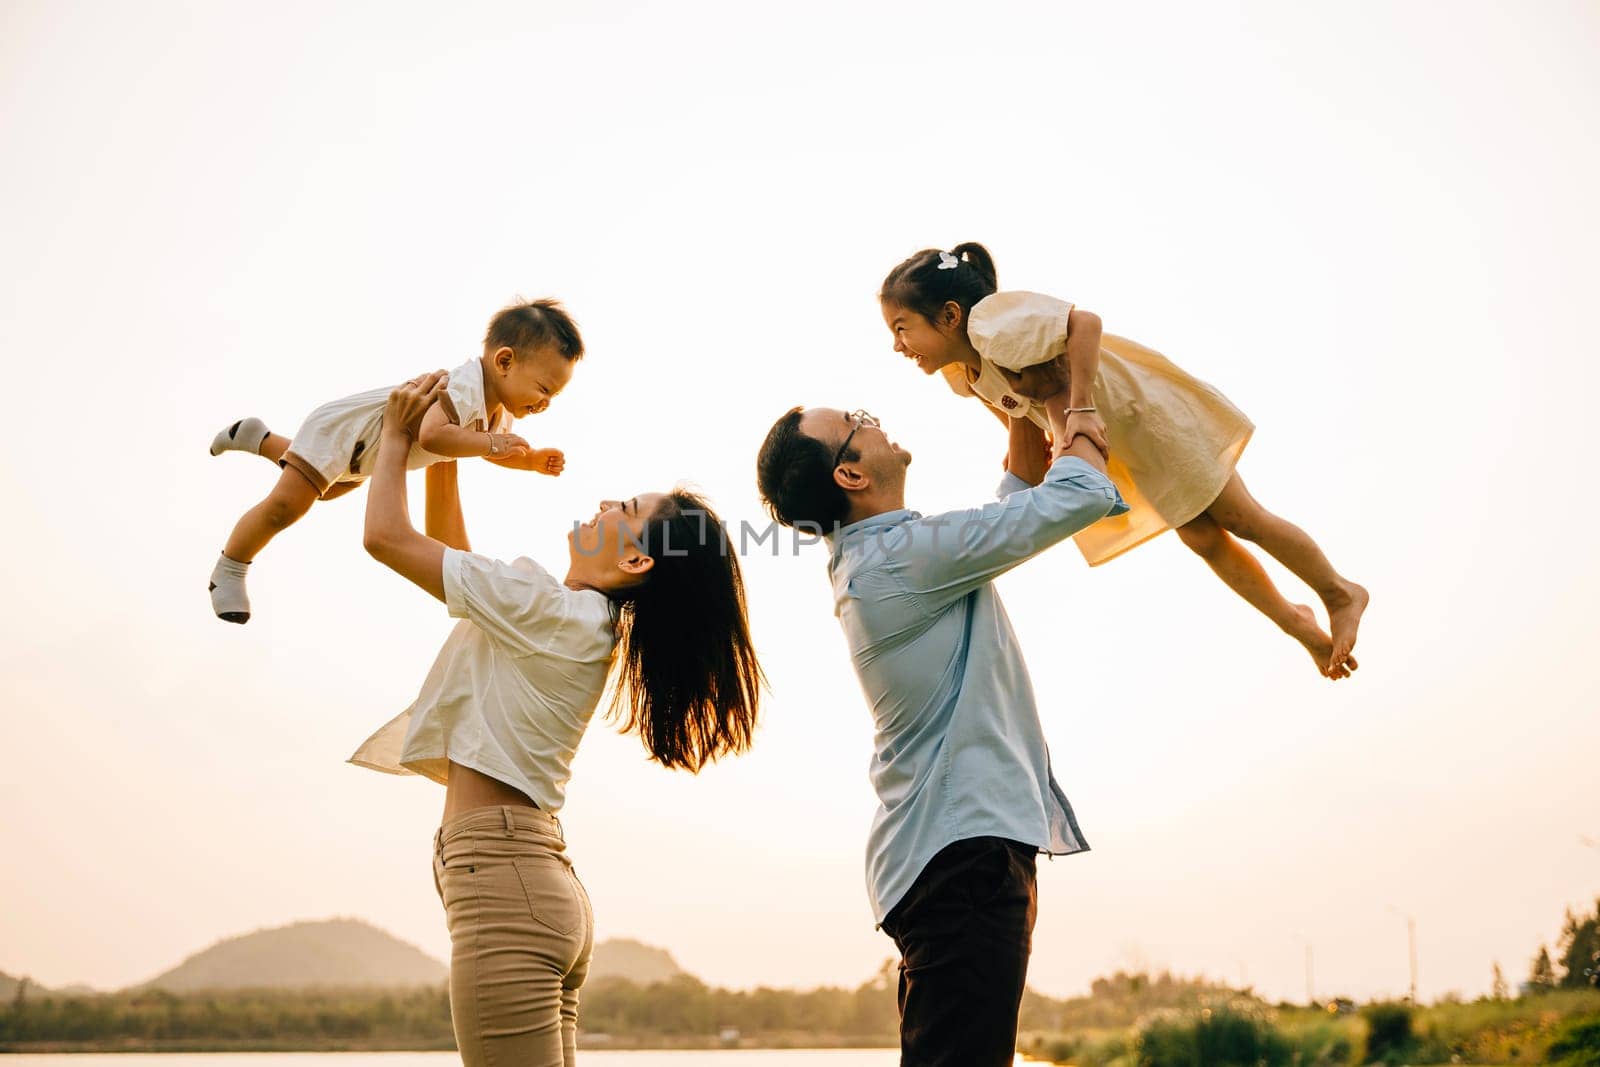 A happy family enjoys a playful moment in a summer field, as the dad and mom throw their child up into the blue sky. The cheerful family looks on with joy and love, Family day